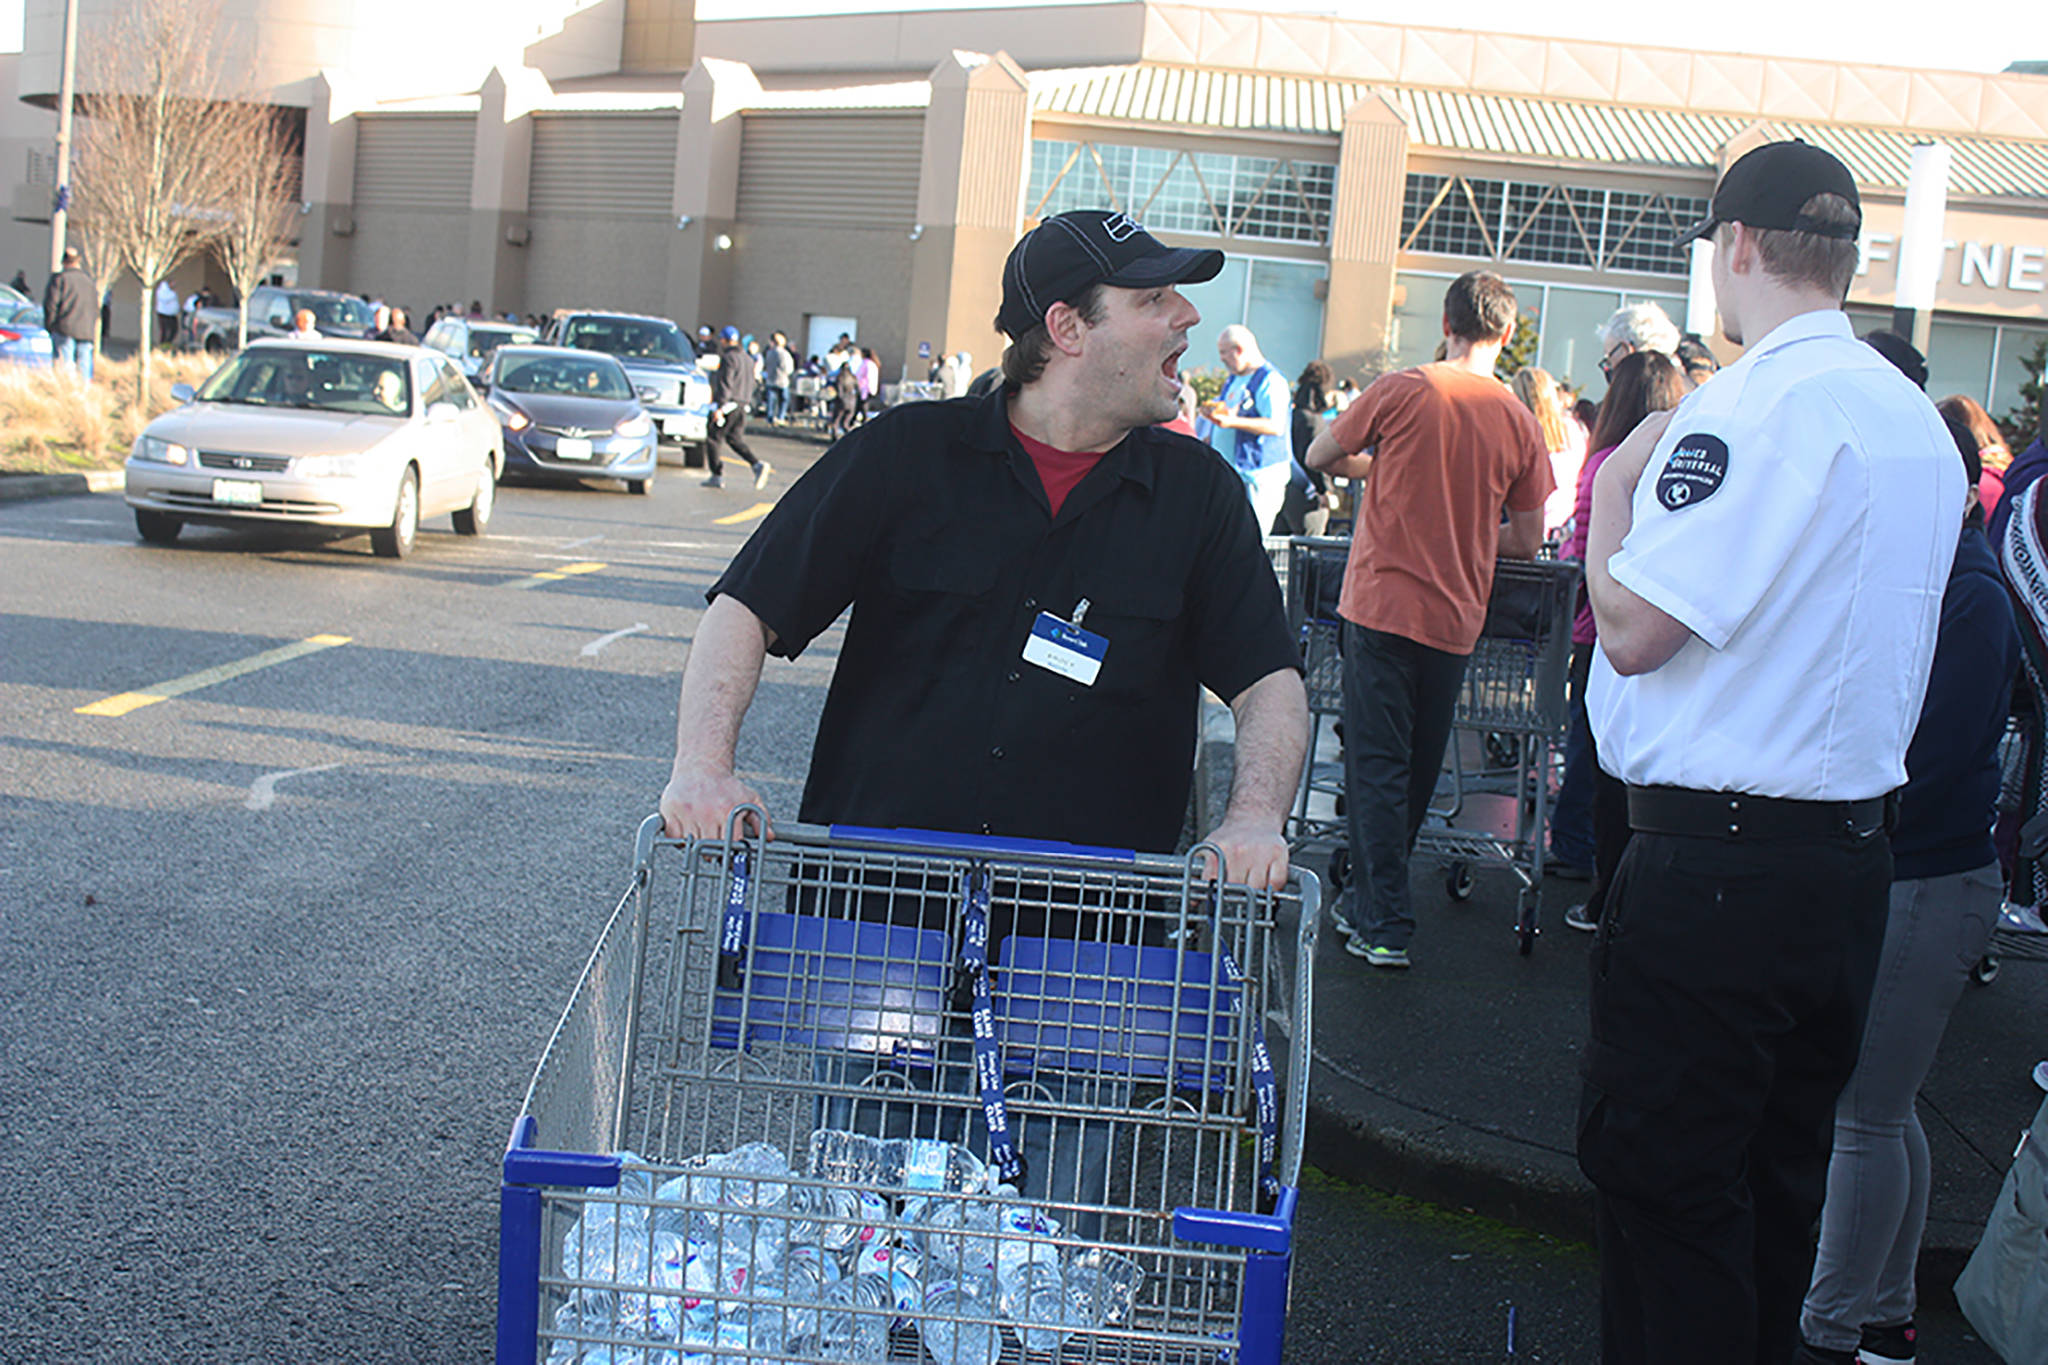 A Sam’s Club employee shouts to offer water to customers waiting patiently and long to enter the store on Saturday afternoon. The line stretched along one side of The Outlet Collection mall in Auburn, with patrons waiting an hour to an hour and a half to enter the bargain-selling store that’s scheduled to close Jan. 26. MARK KLAAS, Reporter